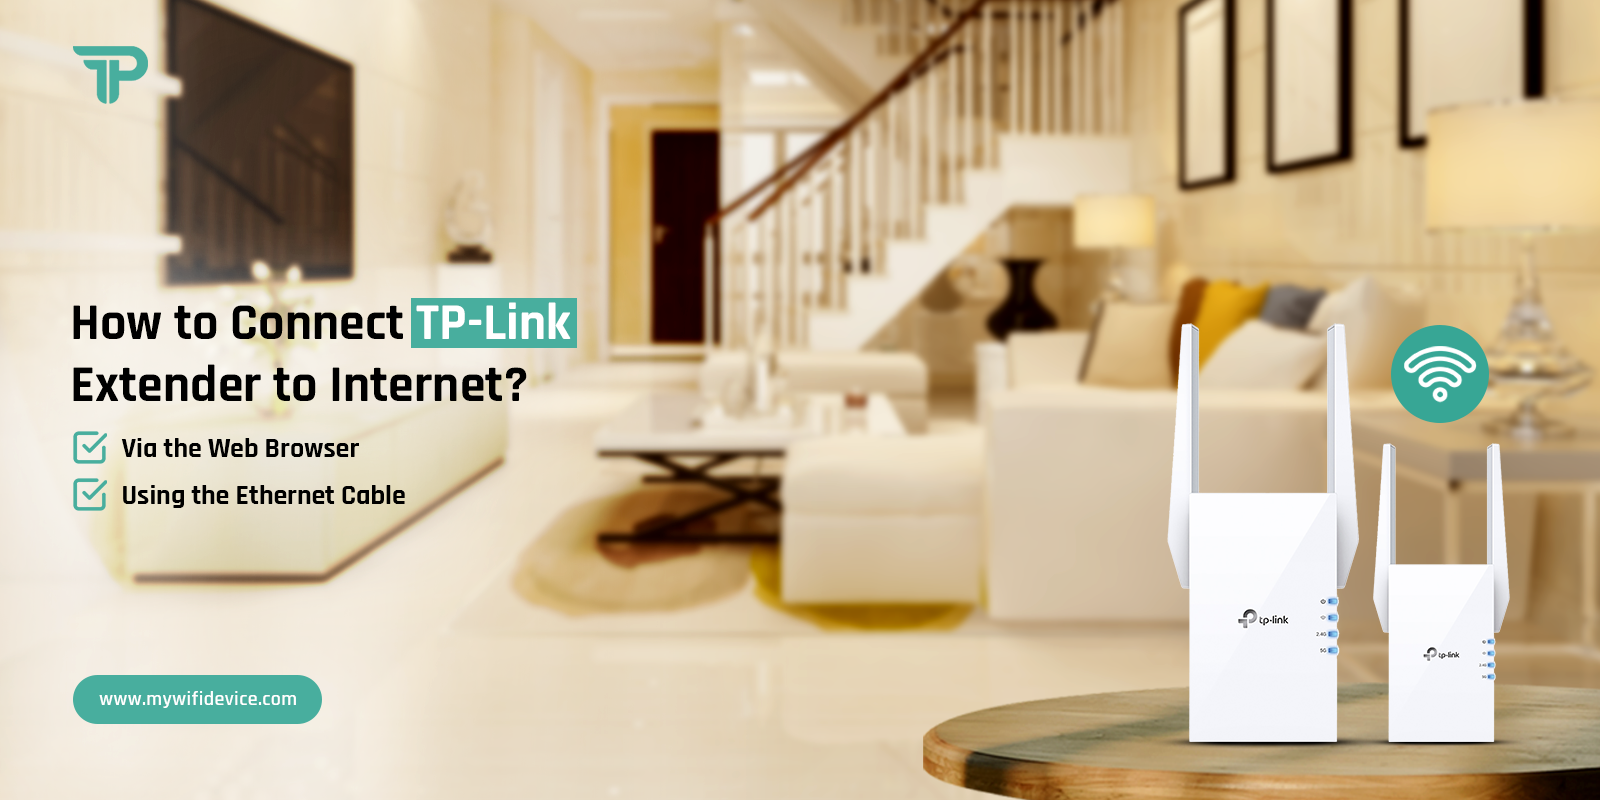 How to Connect TP-Link Extender?